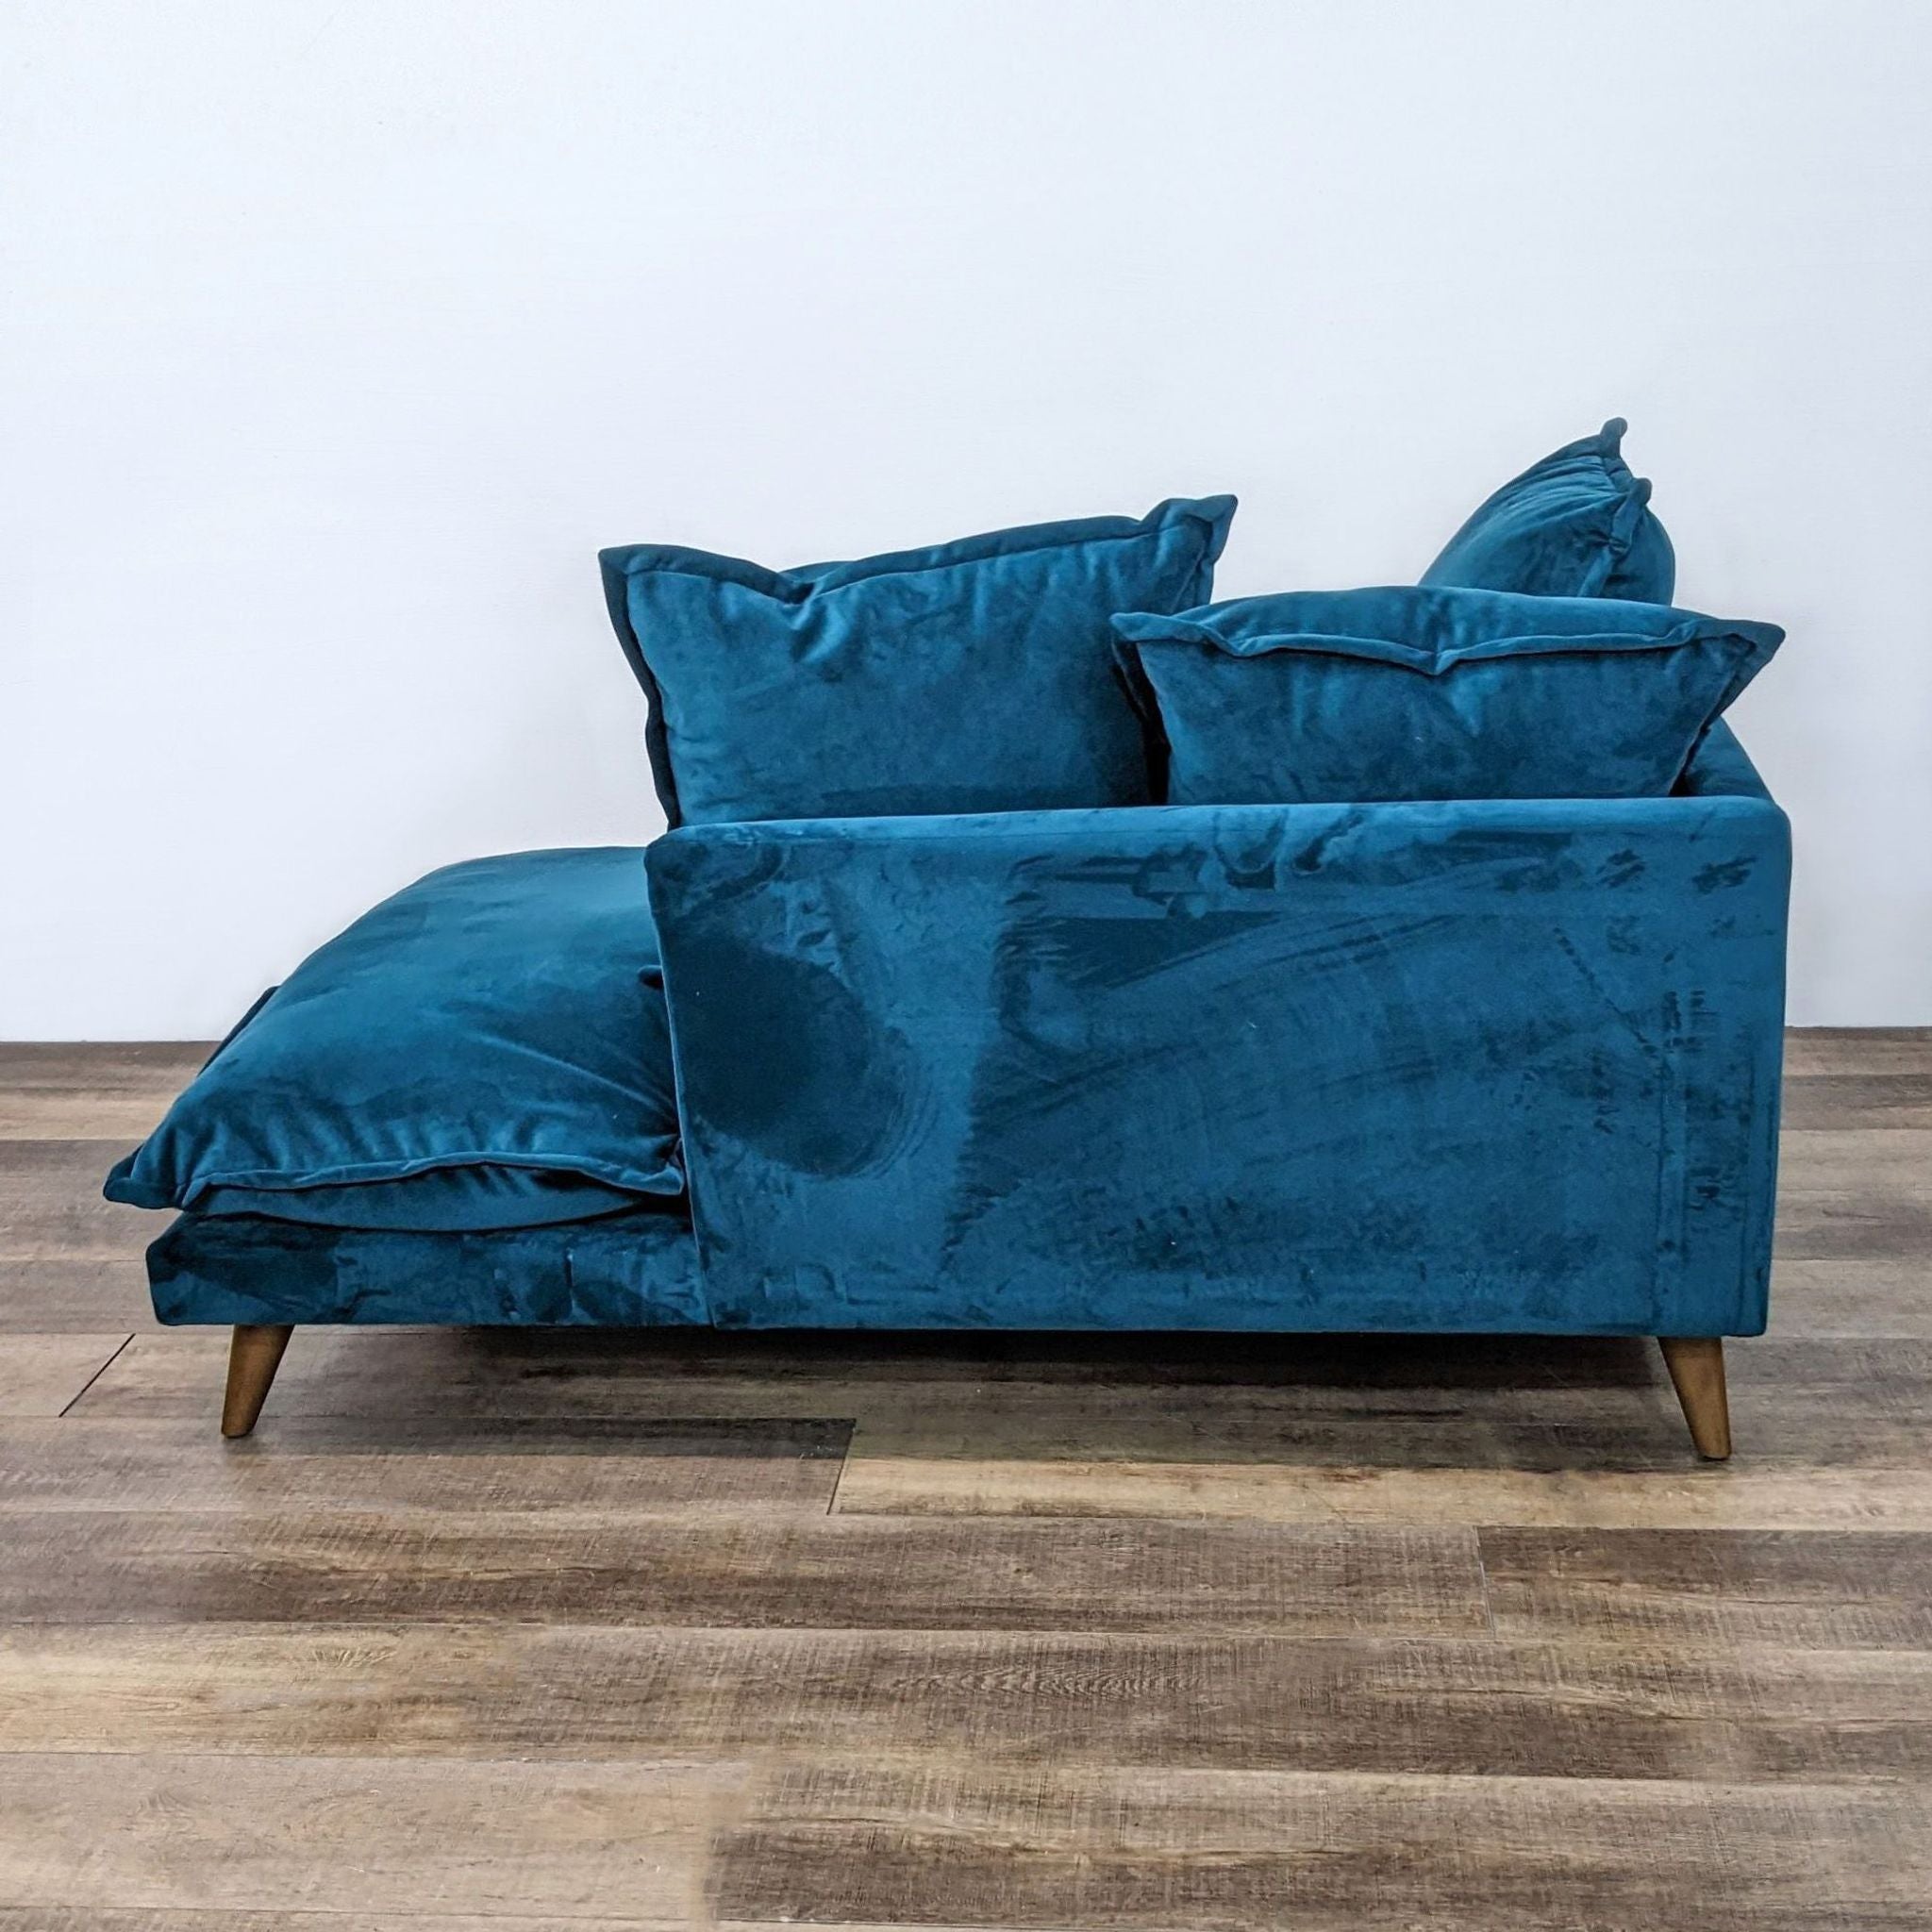 Joybird Furniture's Denna chaise lounge in peacock velvet, viewed from the side, with its ottoman and wood frame with slanted legs on a wooden floor.